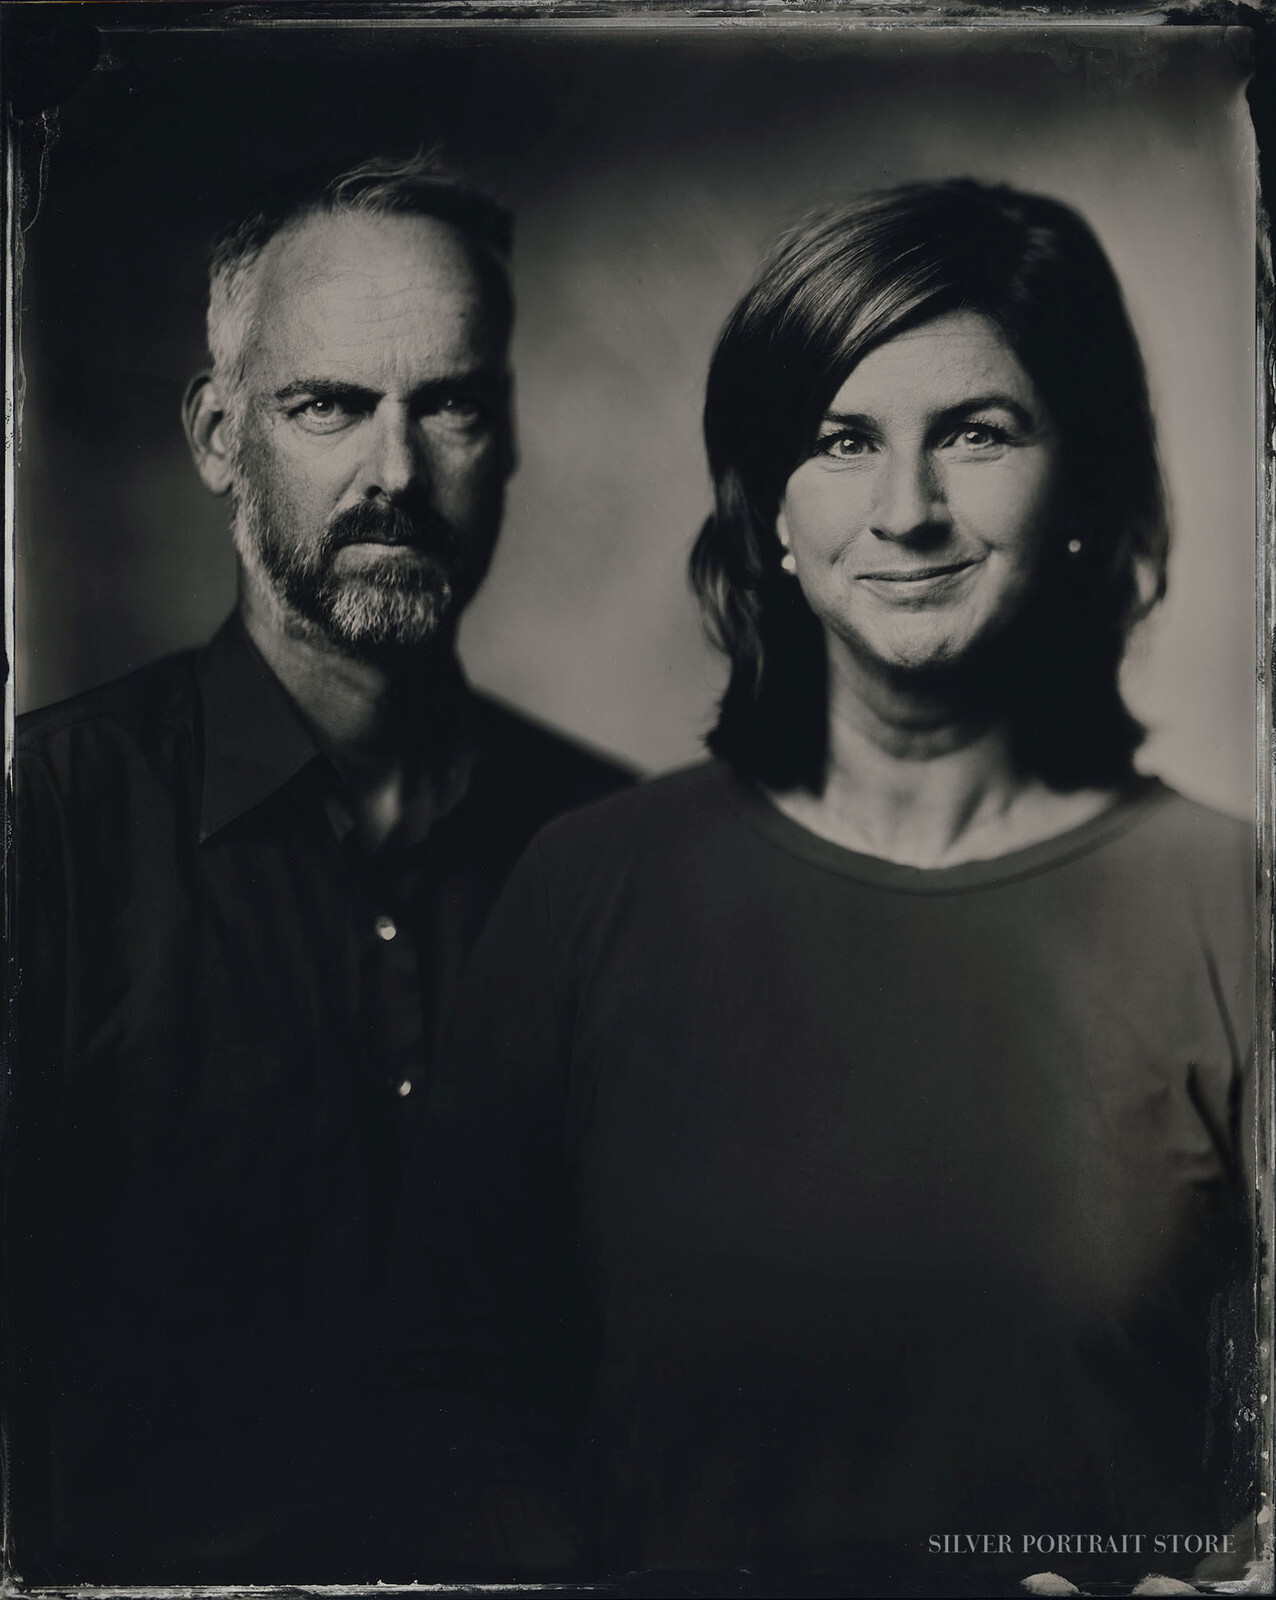 Edward en Silvie-Silver Portrait Store-scan from Wet plate collodion-Tintype 20 x 25 cm.